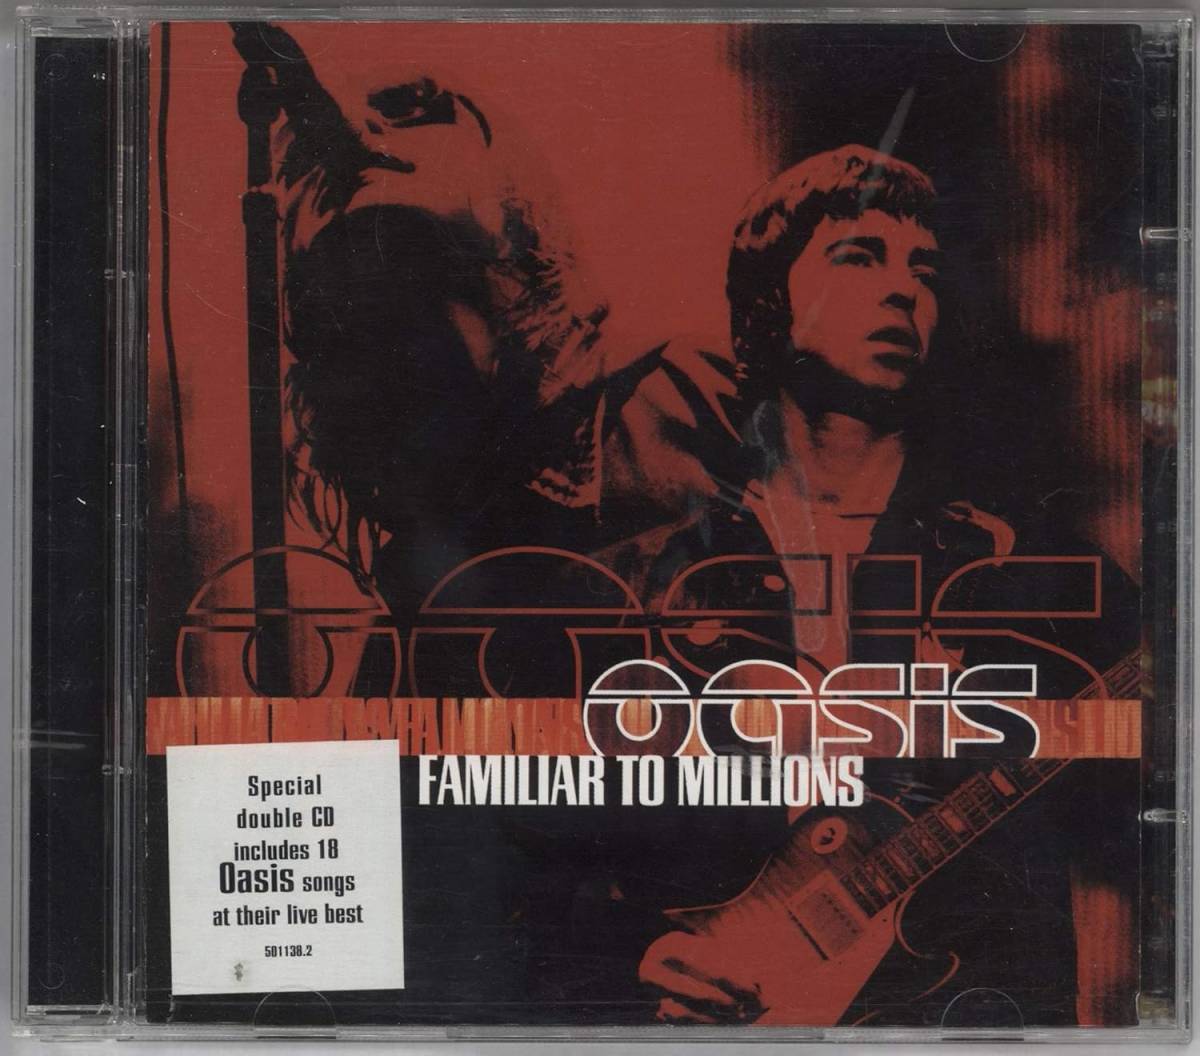 Familiar to Millions オアシス Afghan Whigs 輸入盤CD_画像1